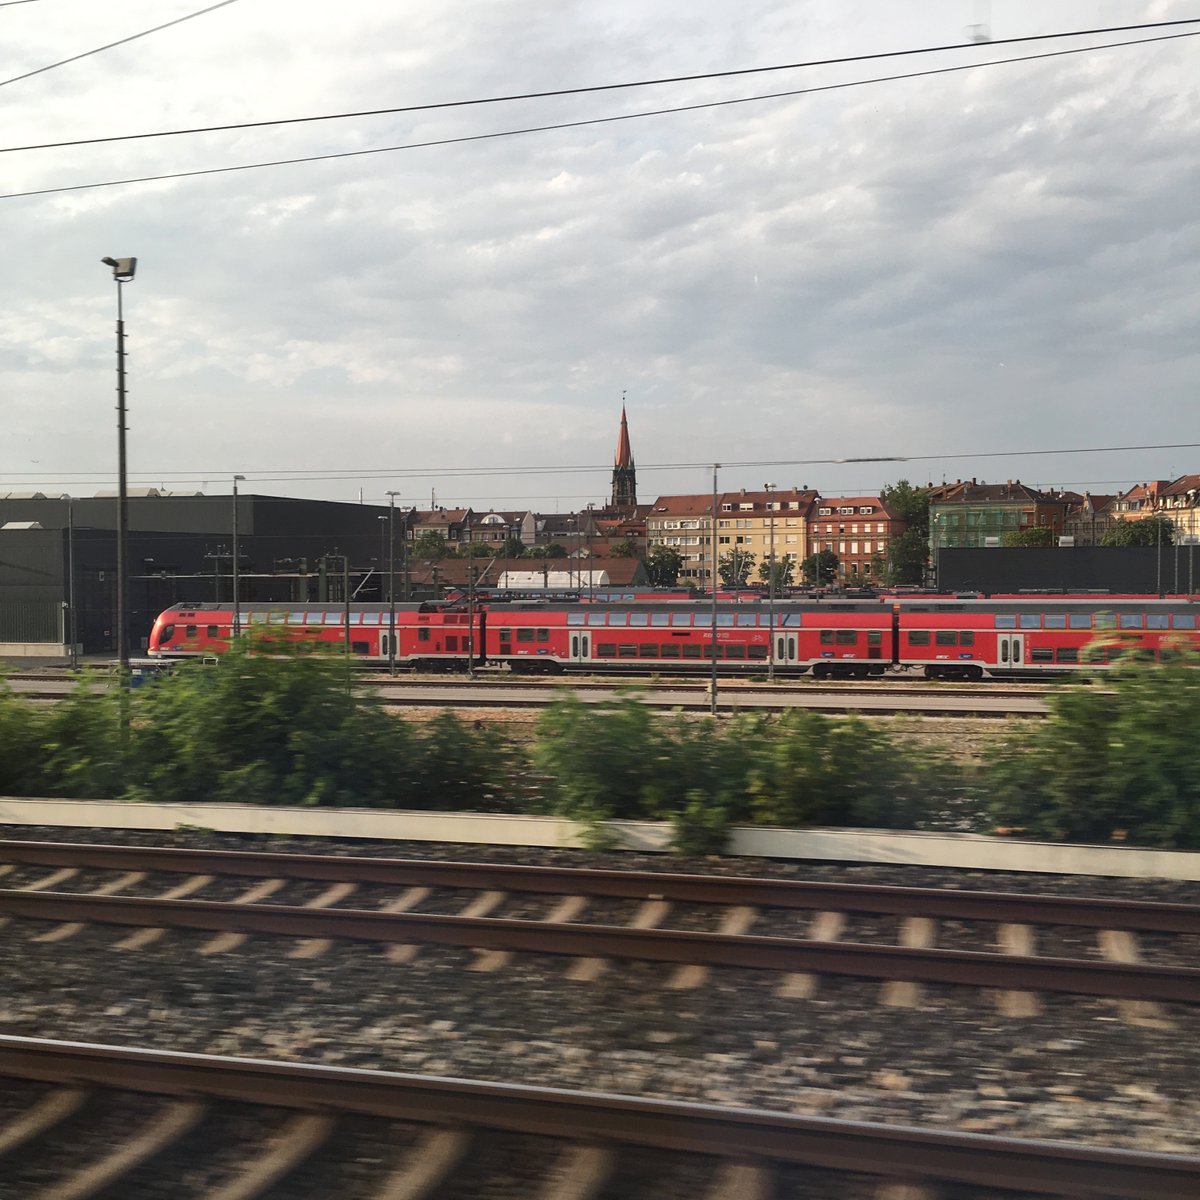 Shortly thereafter, we passed through Nuremberg. Nuremberg is a gorgeous mediaeval/ renaissance city you should definitely visit. Great train museum, too. Too be honest, though, you only see a tiny bit of this from the train...  #theCitybyrail